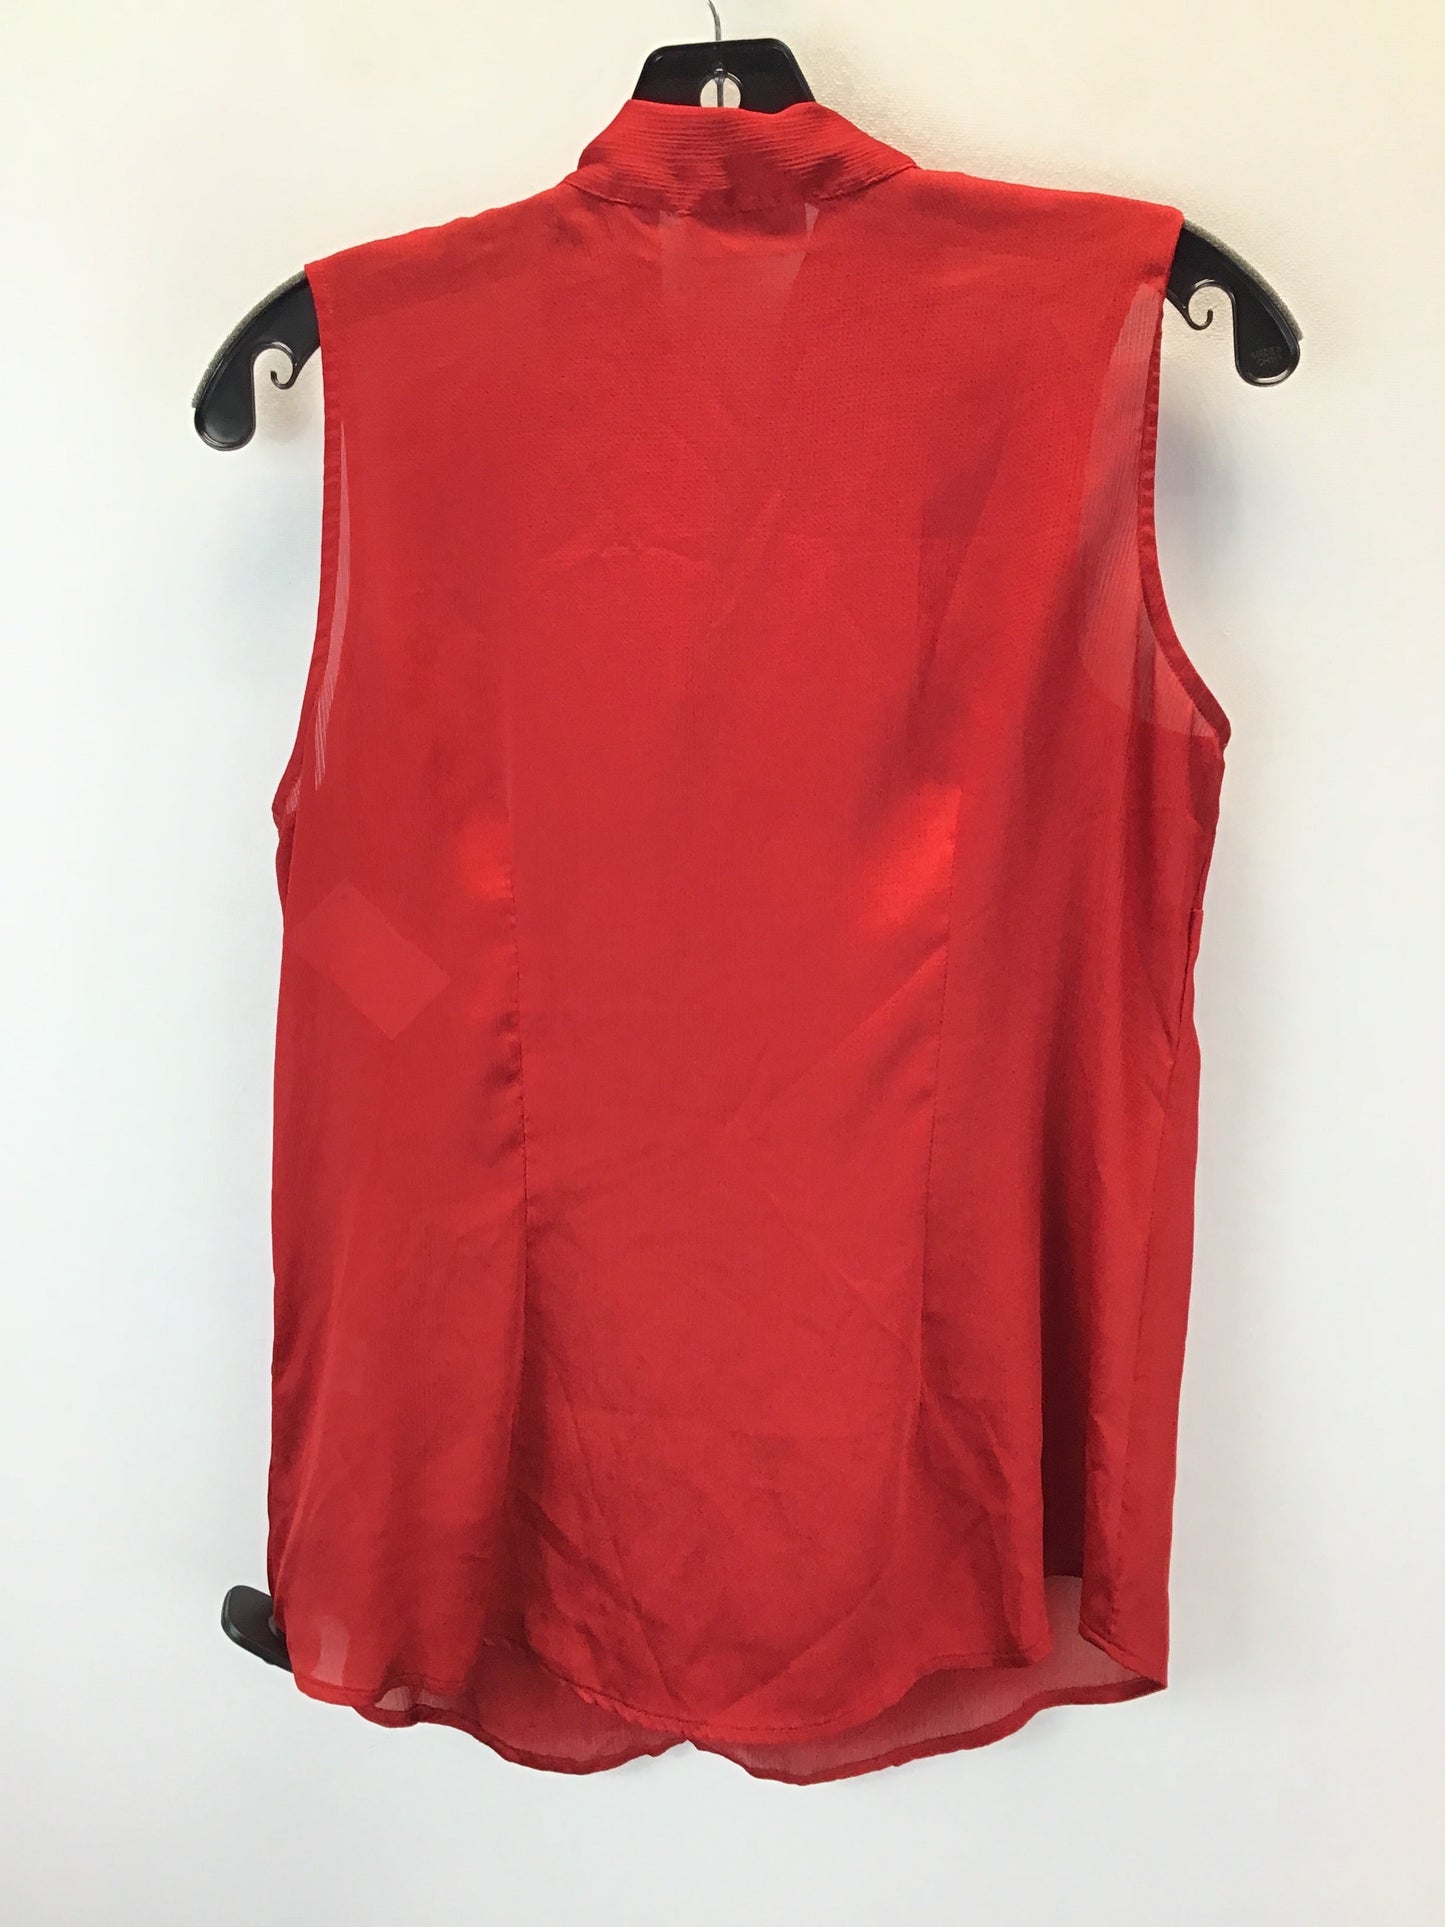 Blouse Sleeveless By New York And Co  Size: S